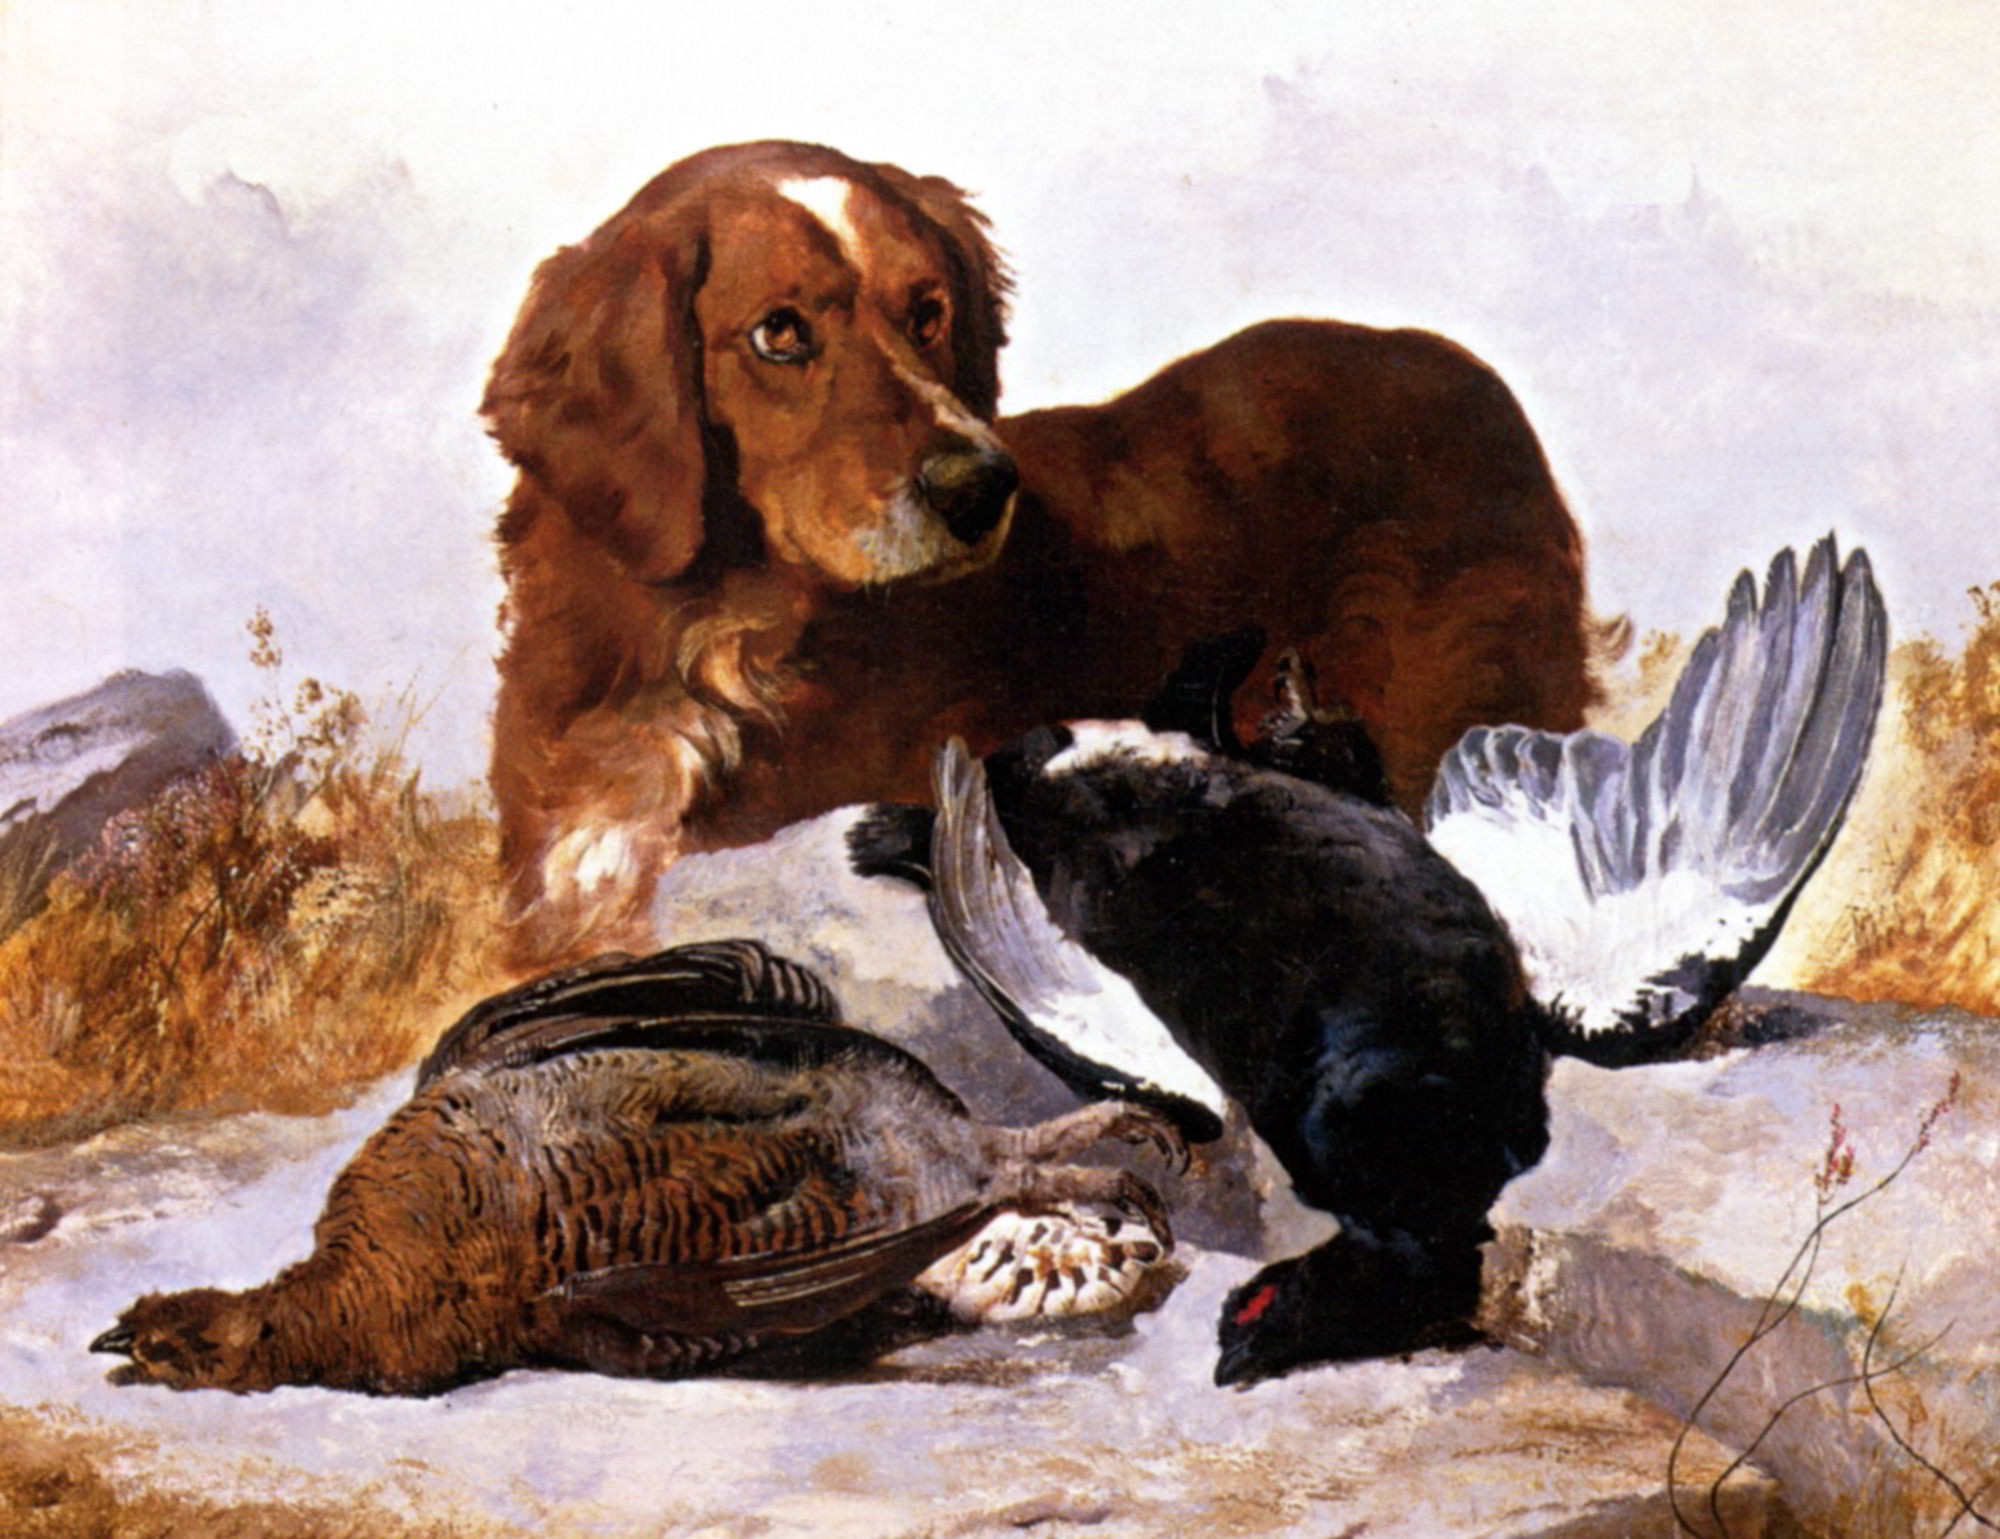 Settler with Game Birds by George W. Horlor